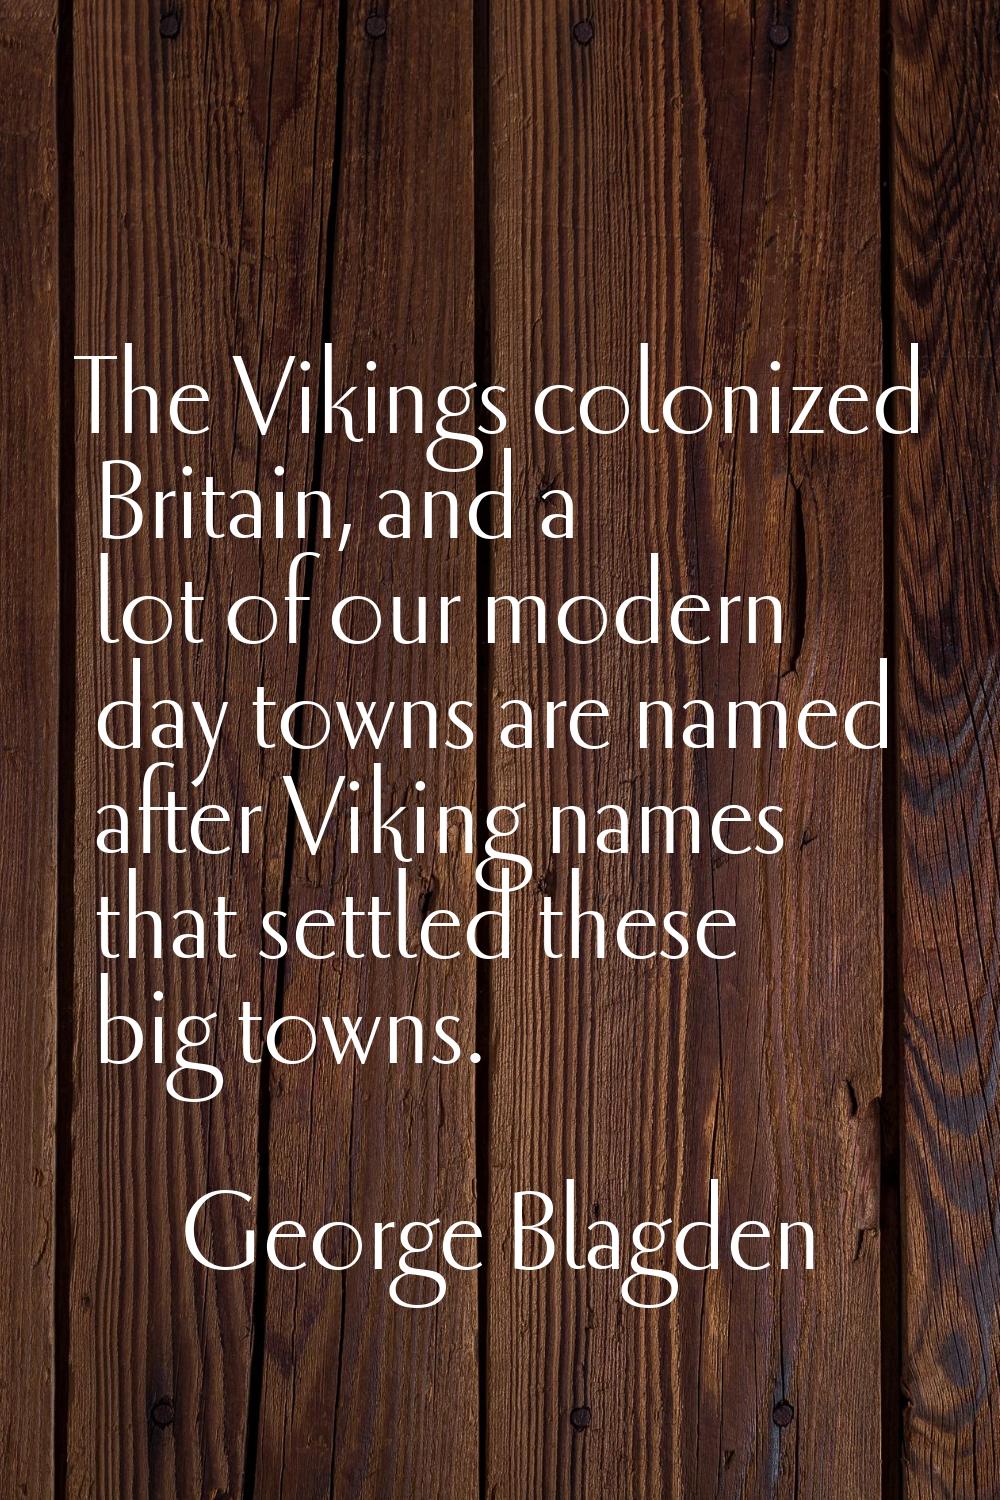 The Vikings colonized Britain, and a lot of our modern day towns are named after Viking names that 